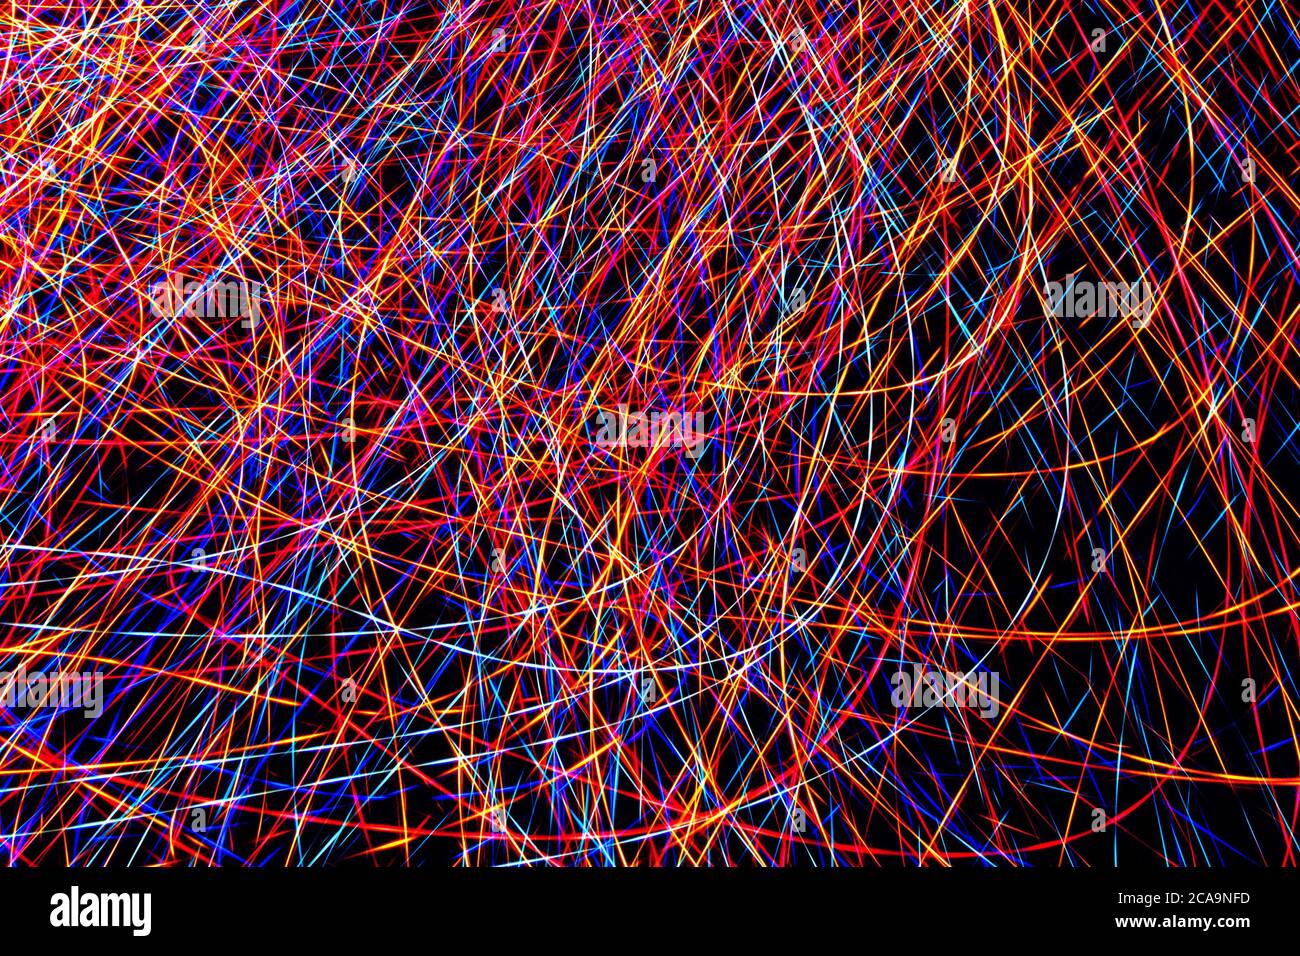 Colorful light painting abstract long exposure image with pink, blue, red and yellow lines on a black background Stock Photo